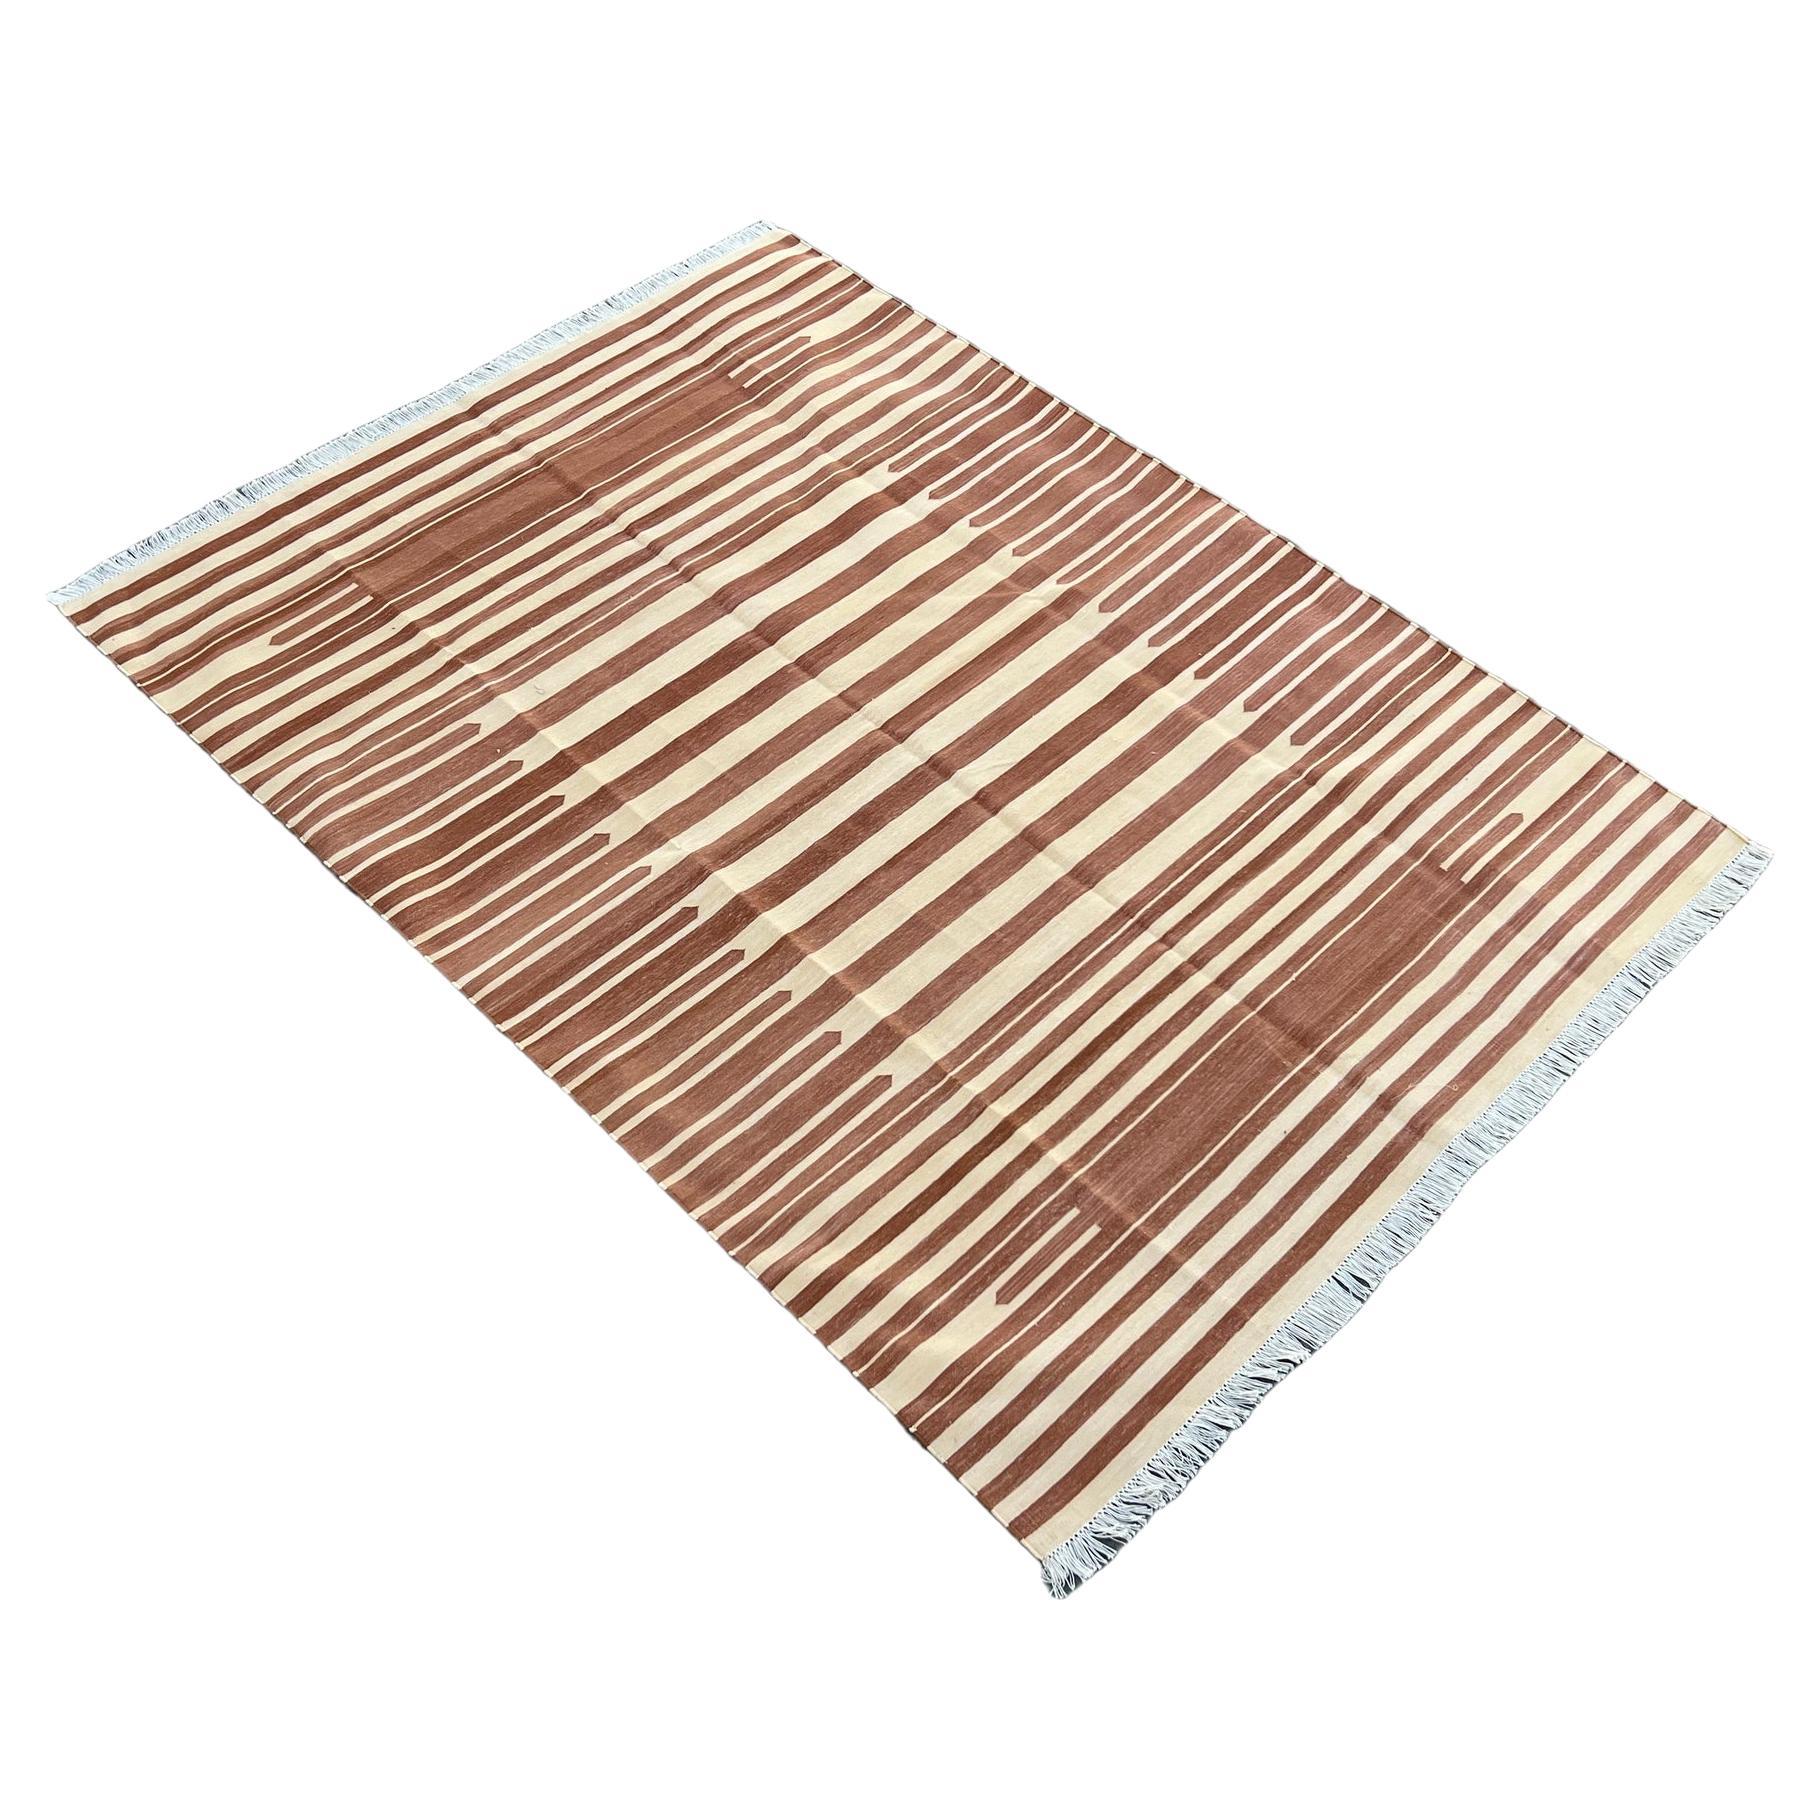 Handmade Cotton Area Flat Weave Rug, 5x7 Tan And Cream Striped Indian Dhurrie